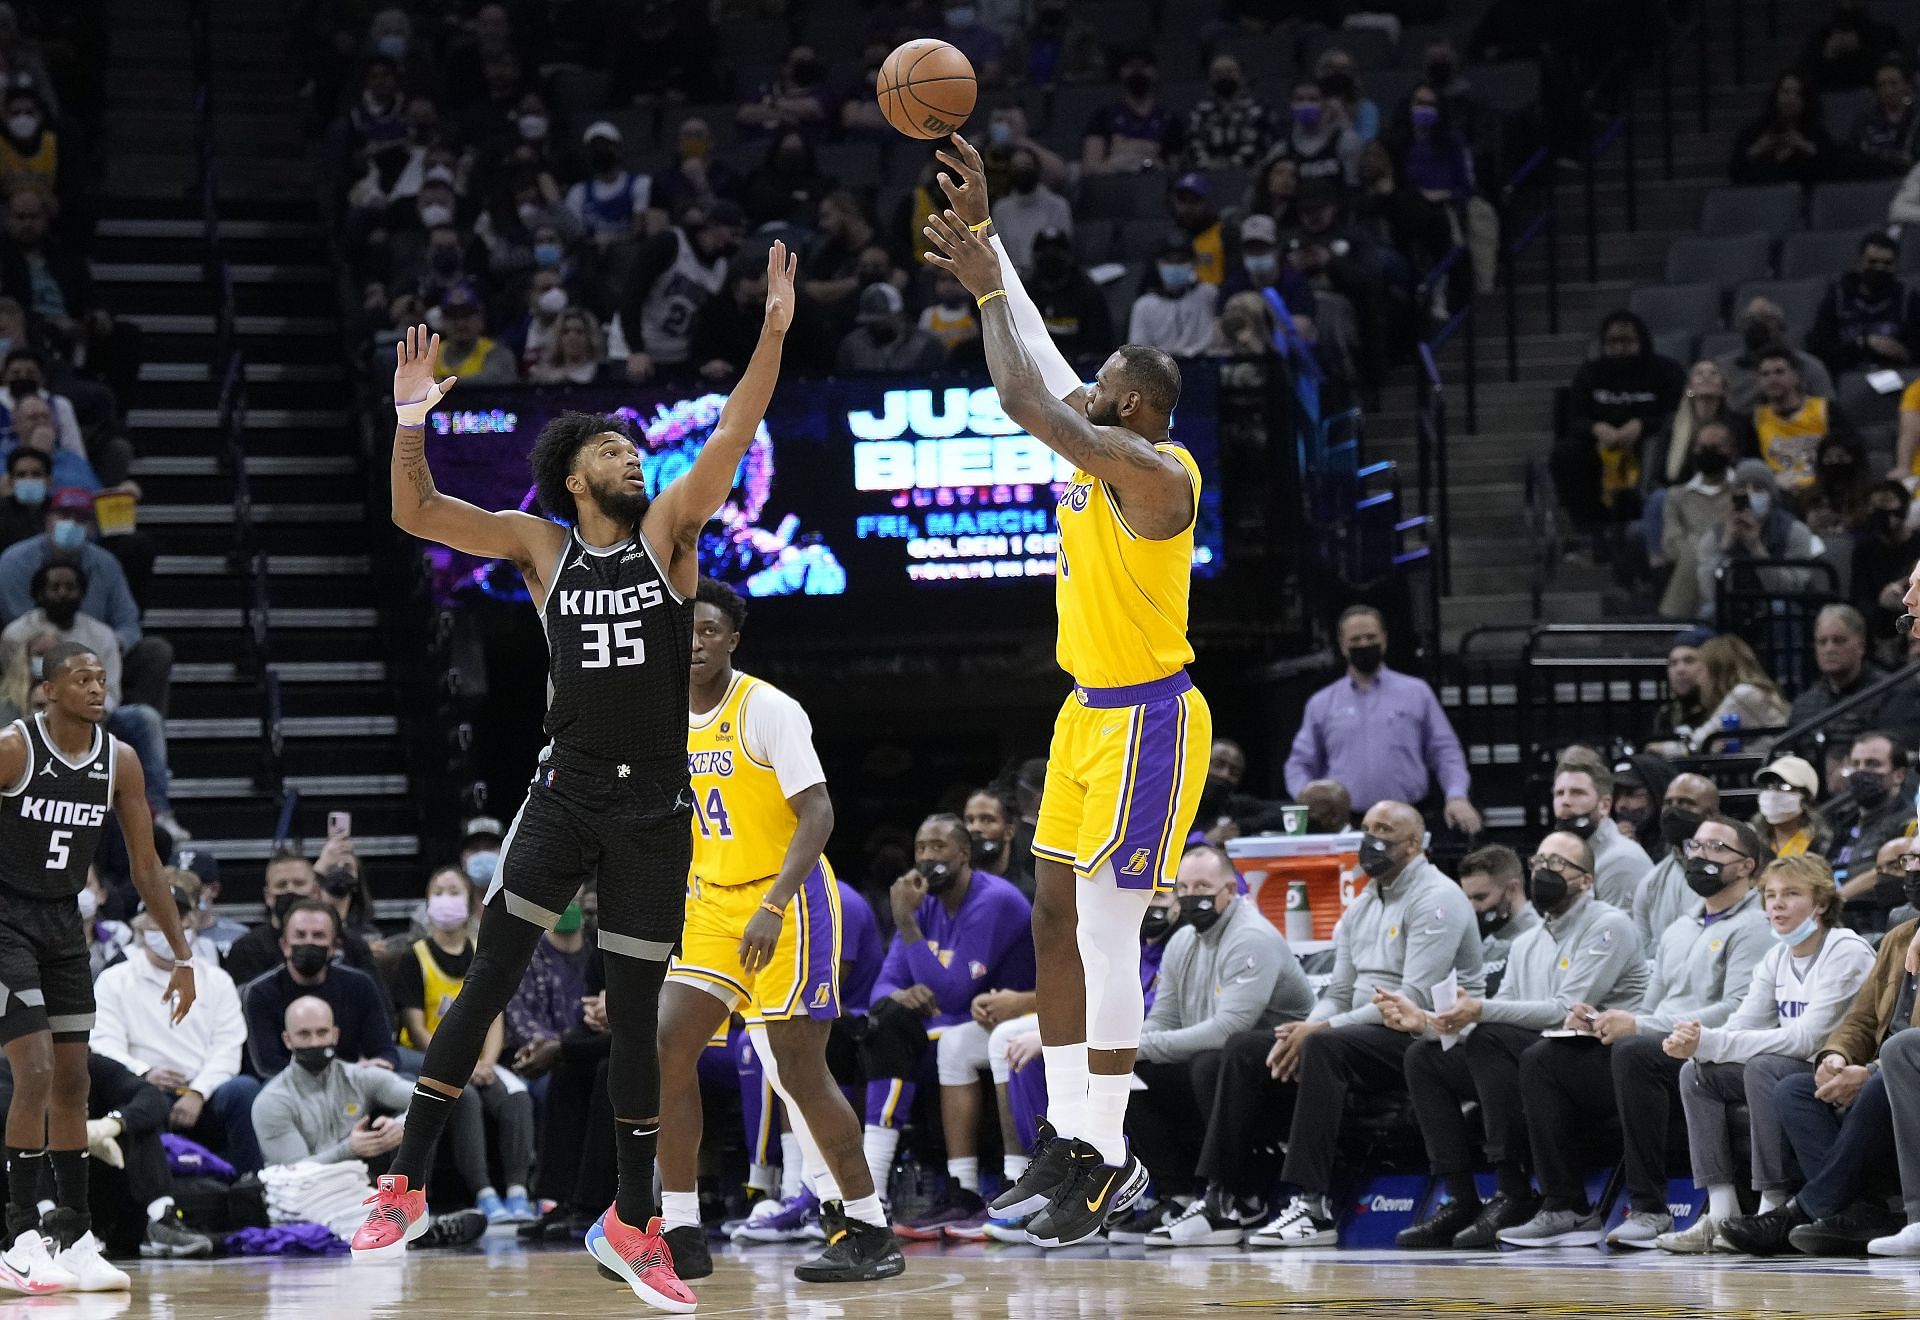 LeBron James #6 of the Los Angeles Lakers shoots a three-point shot over Marvin Bagley III #35 of the Sacramento Kings